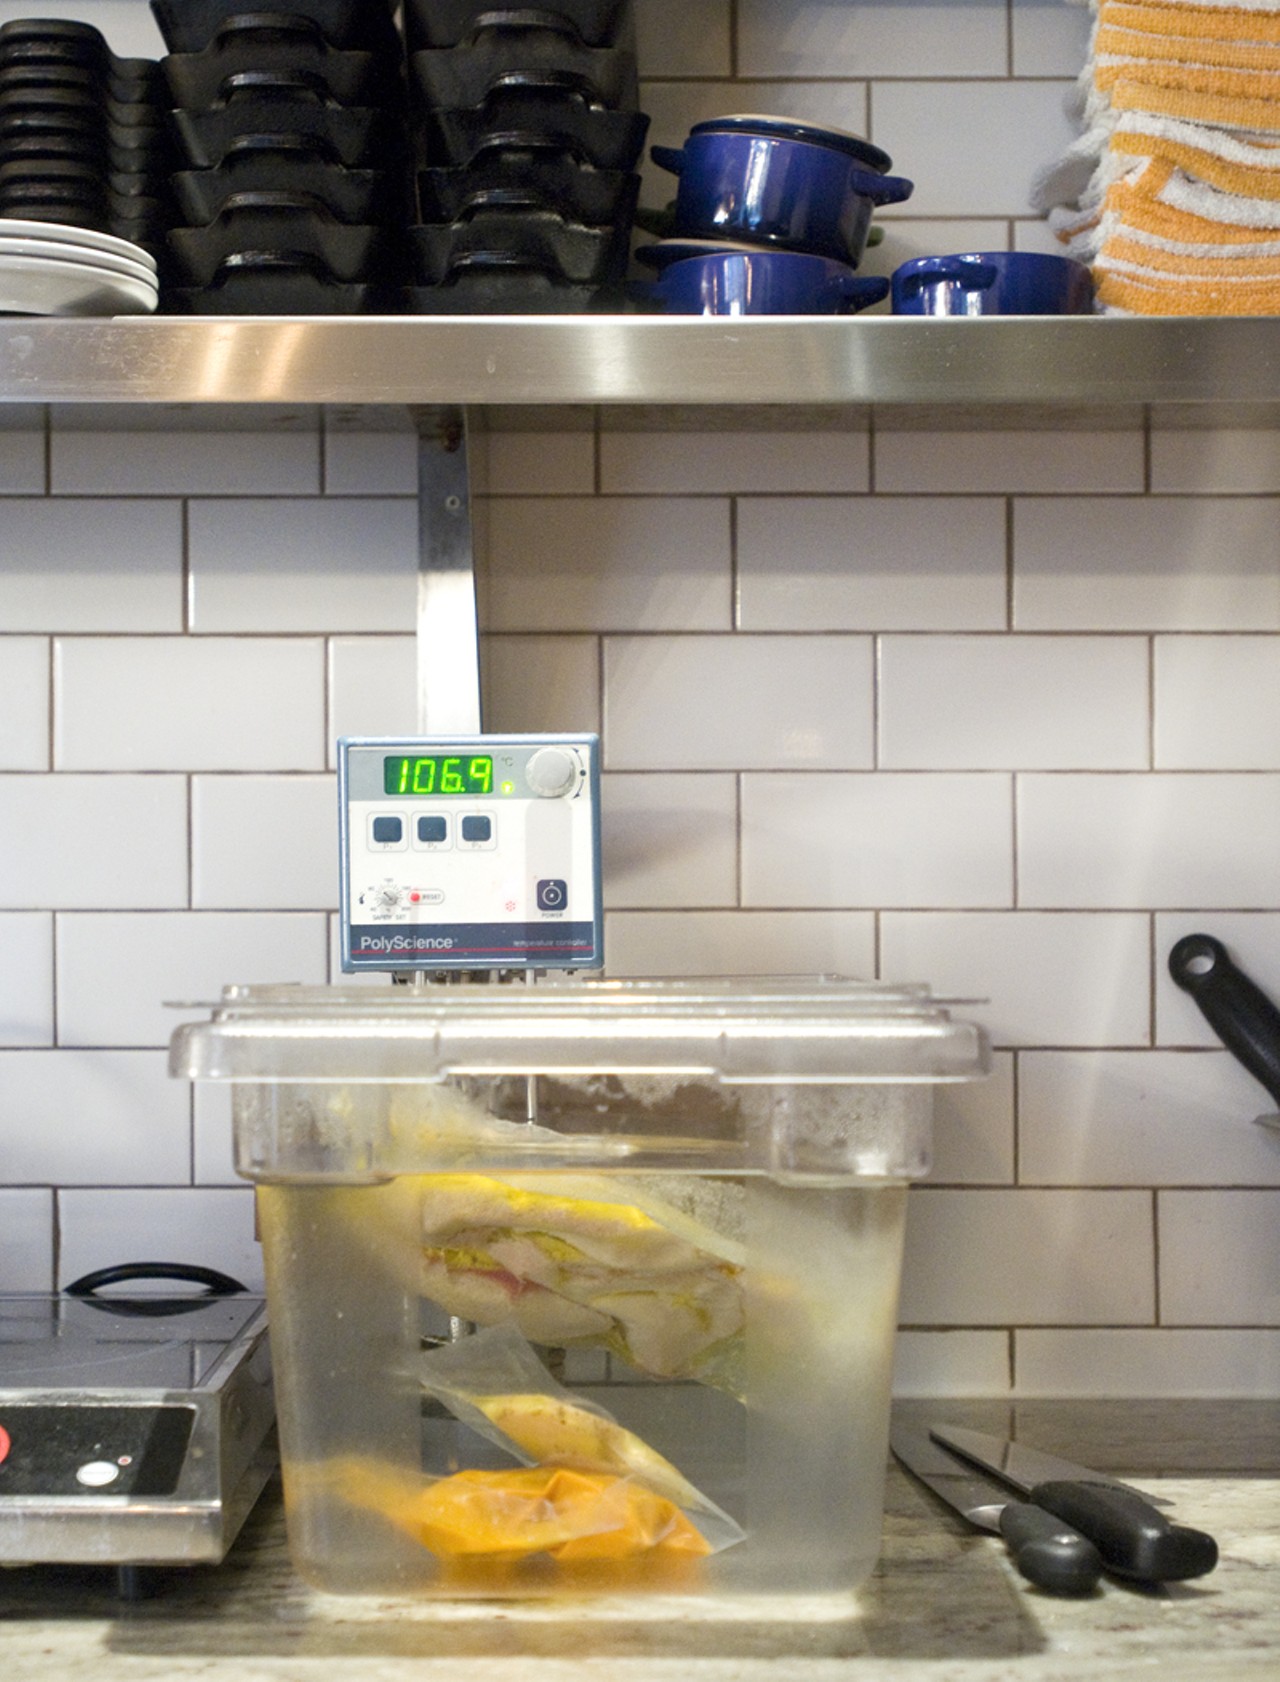 The immersion circulator got its start in science labs, but was later brought into the kitchen as a way to evenly cook and maintain exact temperatures by placing vacuum-sealed food in a water bath at an exact and desired temperature. This process is called "sous-vide," which means, "under vacuum." In addition to its precision, chef Gerard Craft also likes it for its space-saving dimensions.